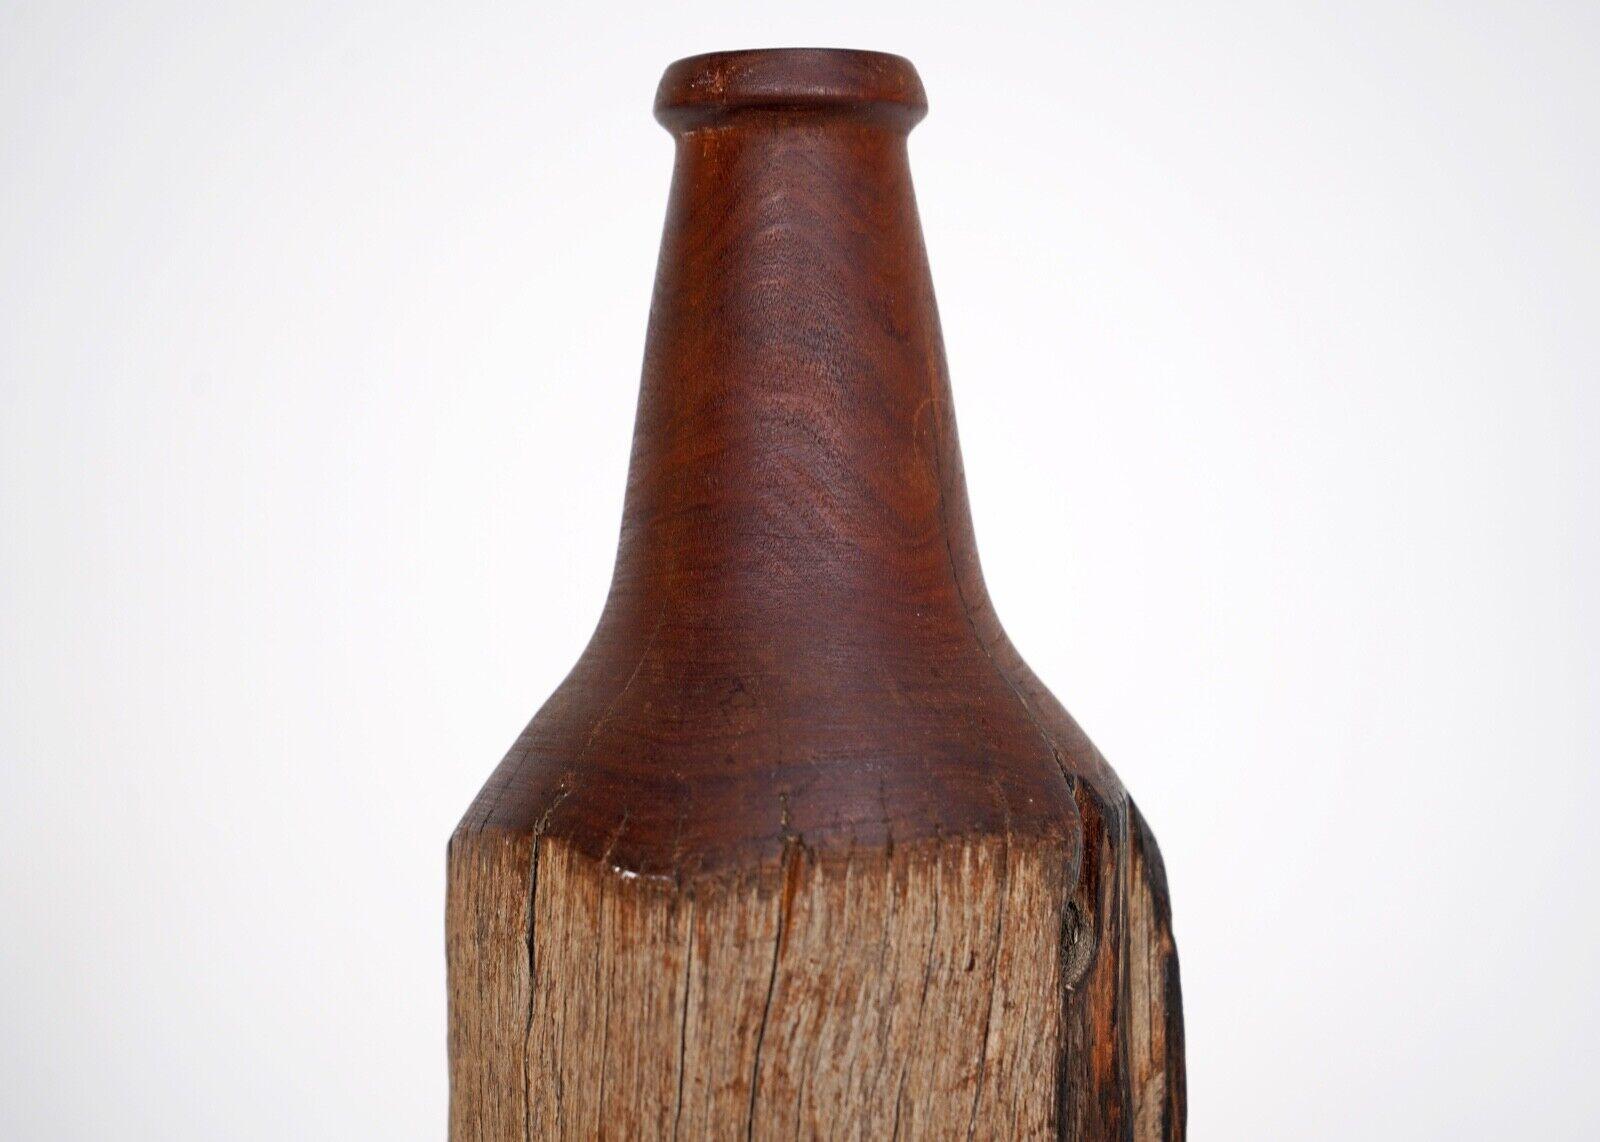 A turned wood sculpture of a bottle.
Possibly made from drift wood.
A tactile piece with beautiful form.
 Signed and dated on the base. Dated 94.
 
Dimensions
Height - 20cm
Diameter 10.5cm.